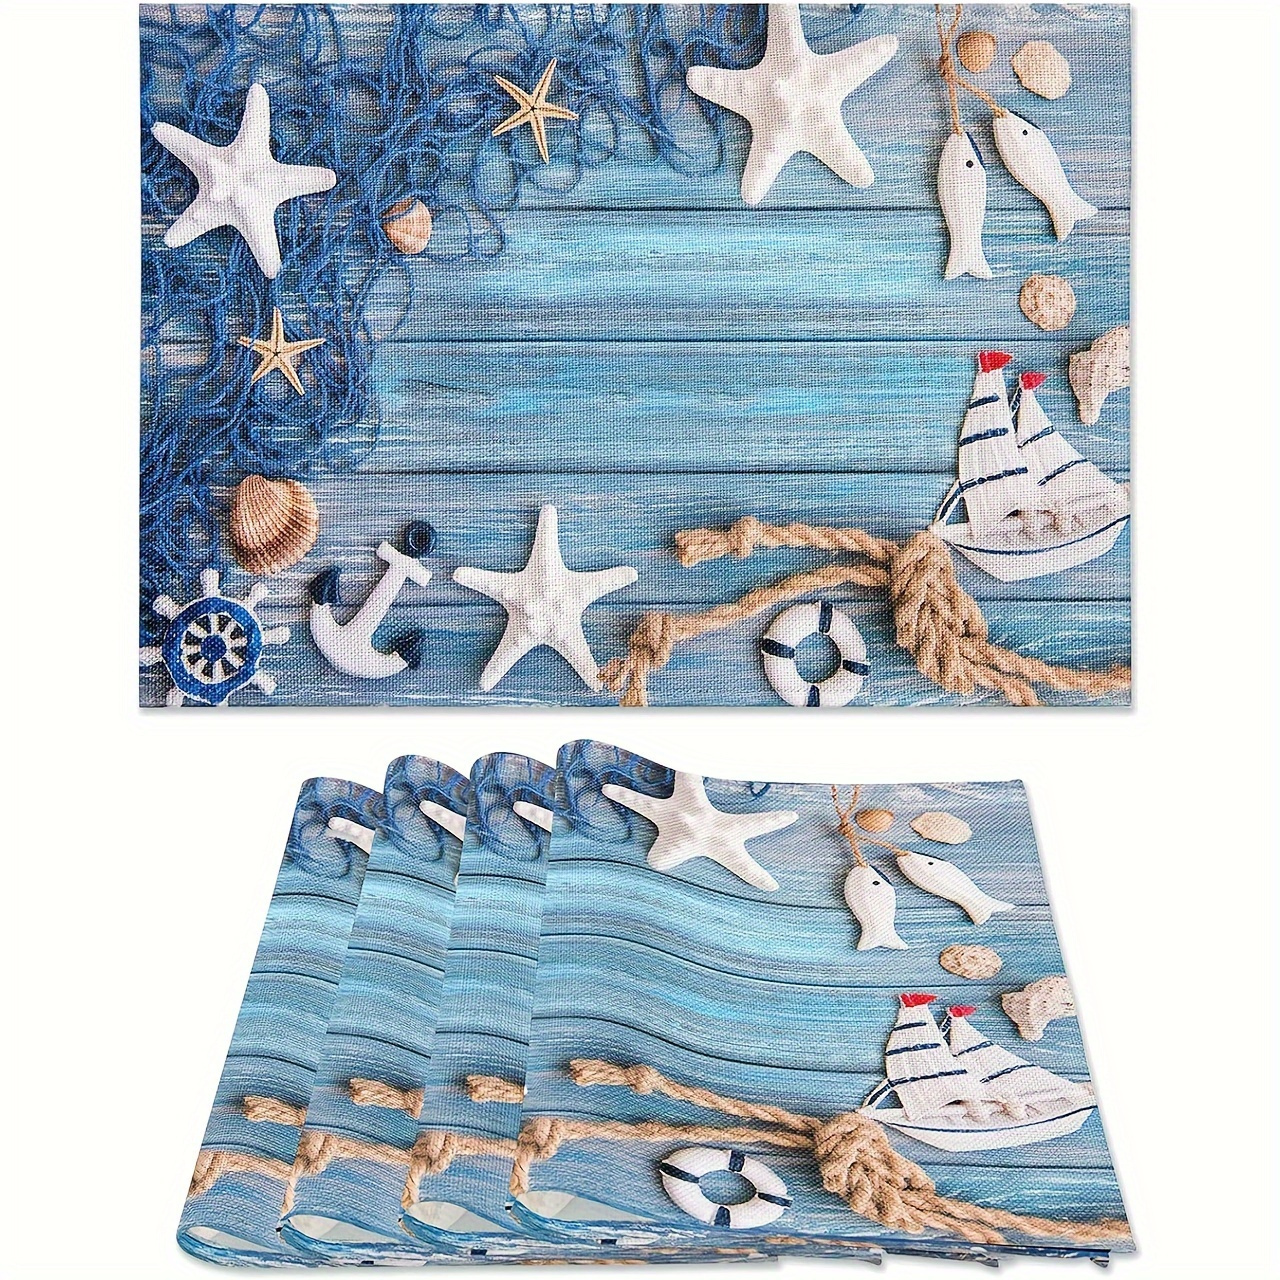 

Jit 4-pack Summer Sailing Theme Place Mats, Starfish Shell Fishing Net Design, Anti-slip Heat-resistant Washable Polyester Dining Table Mats For Coastal Home Kitchen Decor